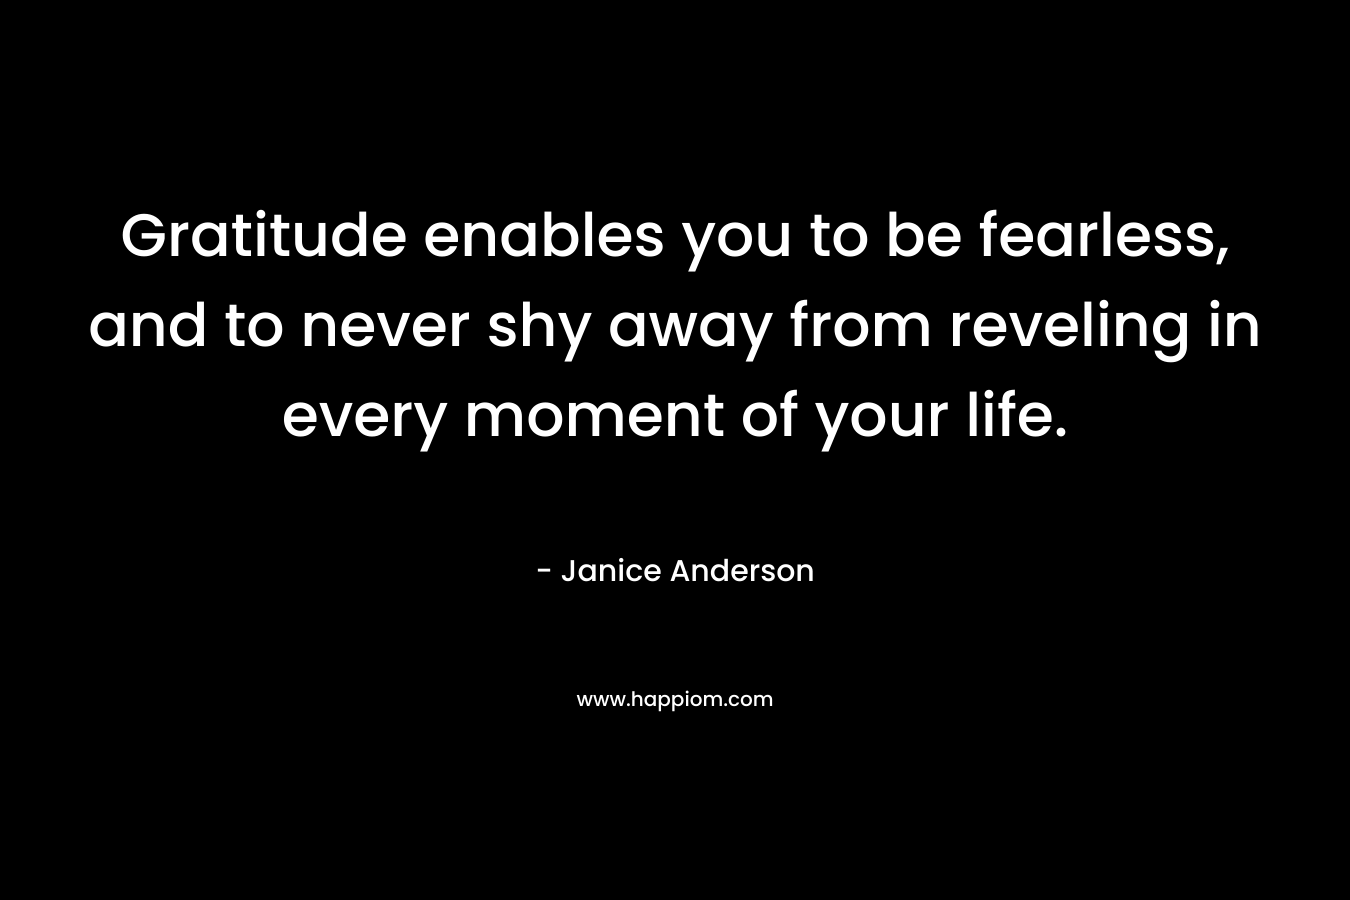 Gratitude enables you to be fearless, and to never shy away from reveling in every moment of your life. – Janice  Anderson